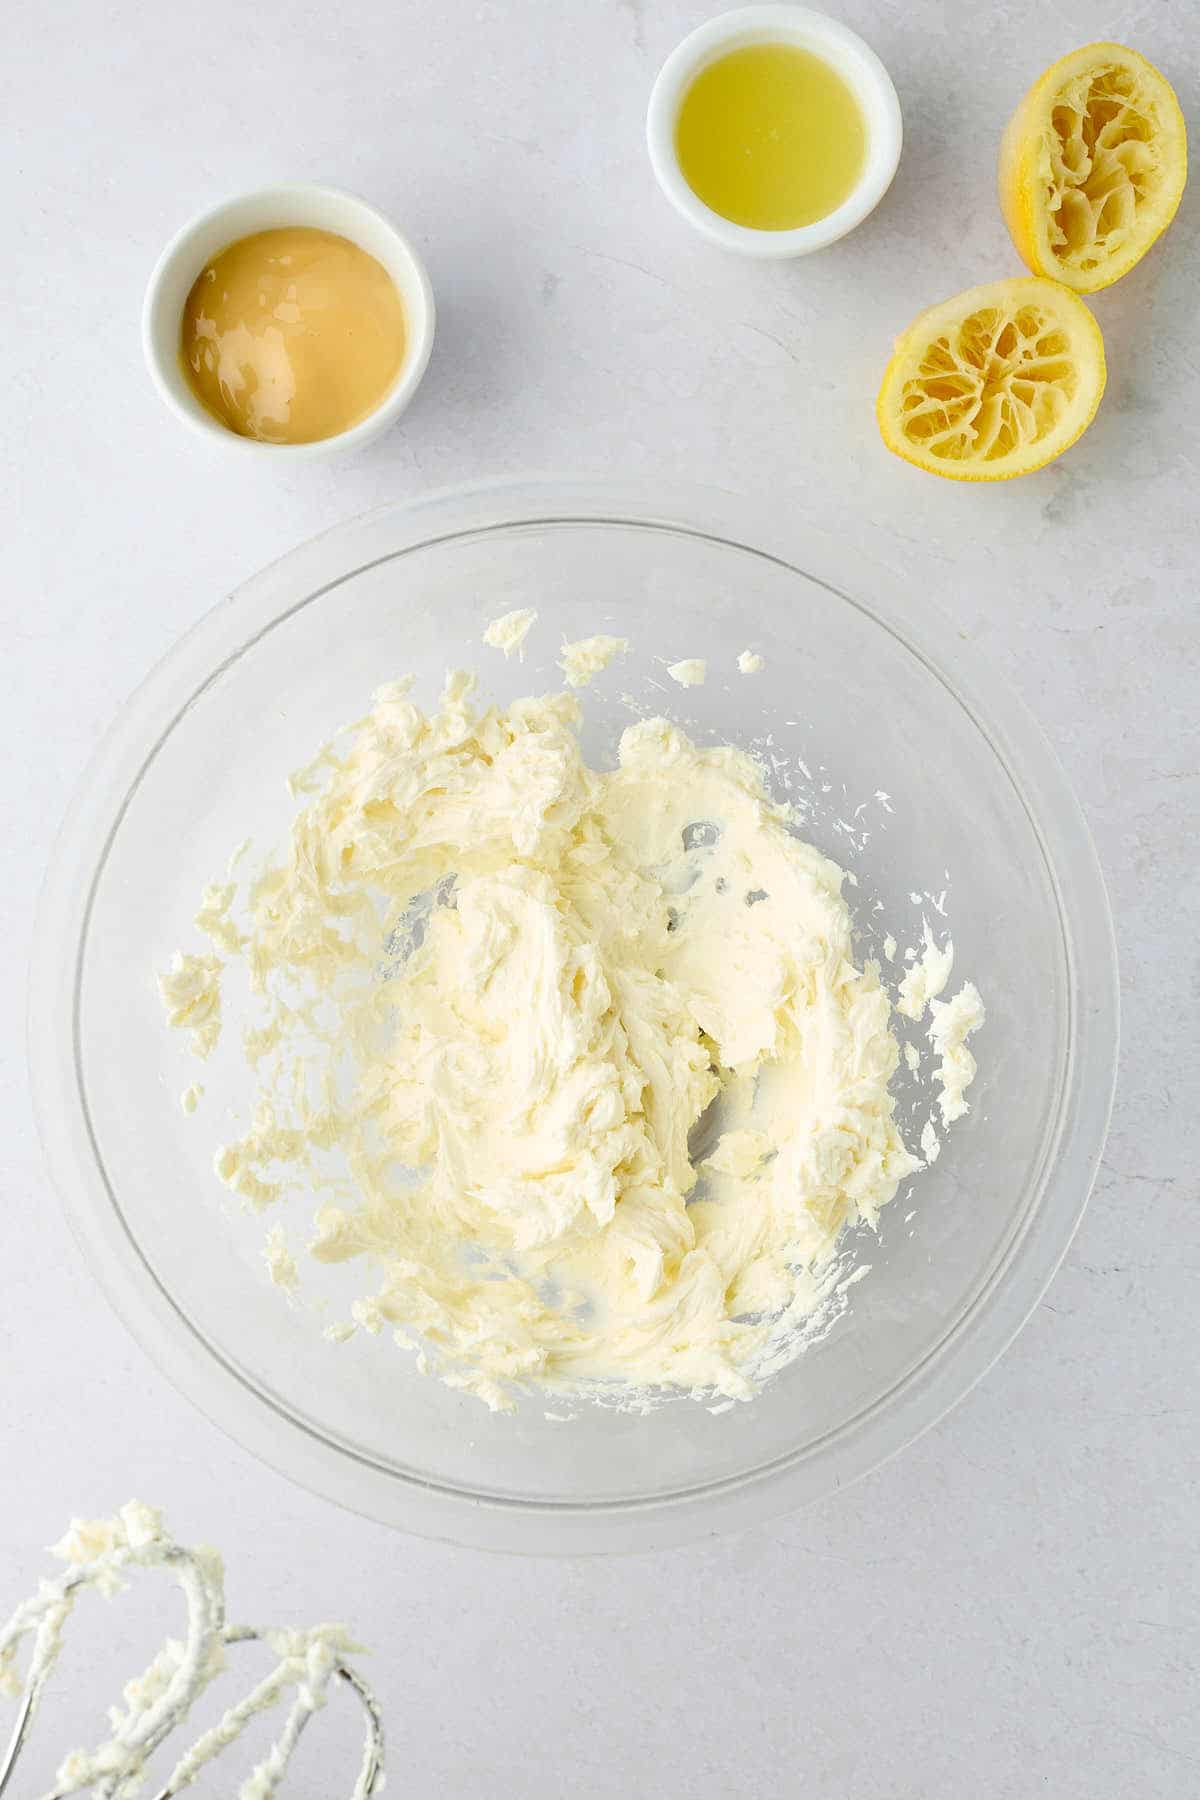 Softened cream cheese whipped in a bowl with lemon juice and sweetened condensed milk next to it.